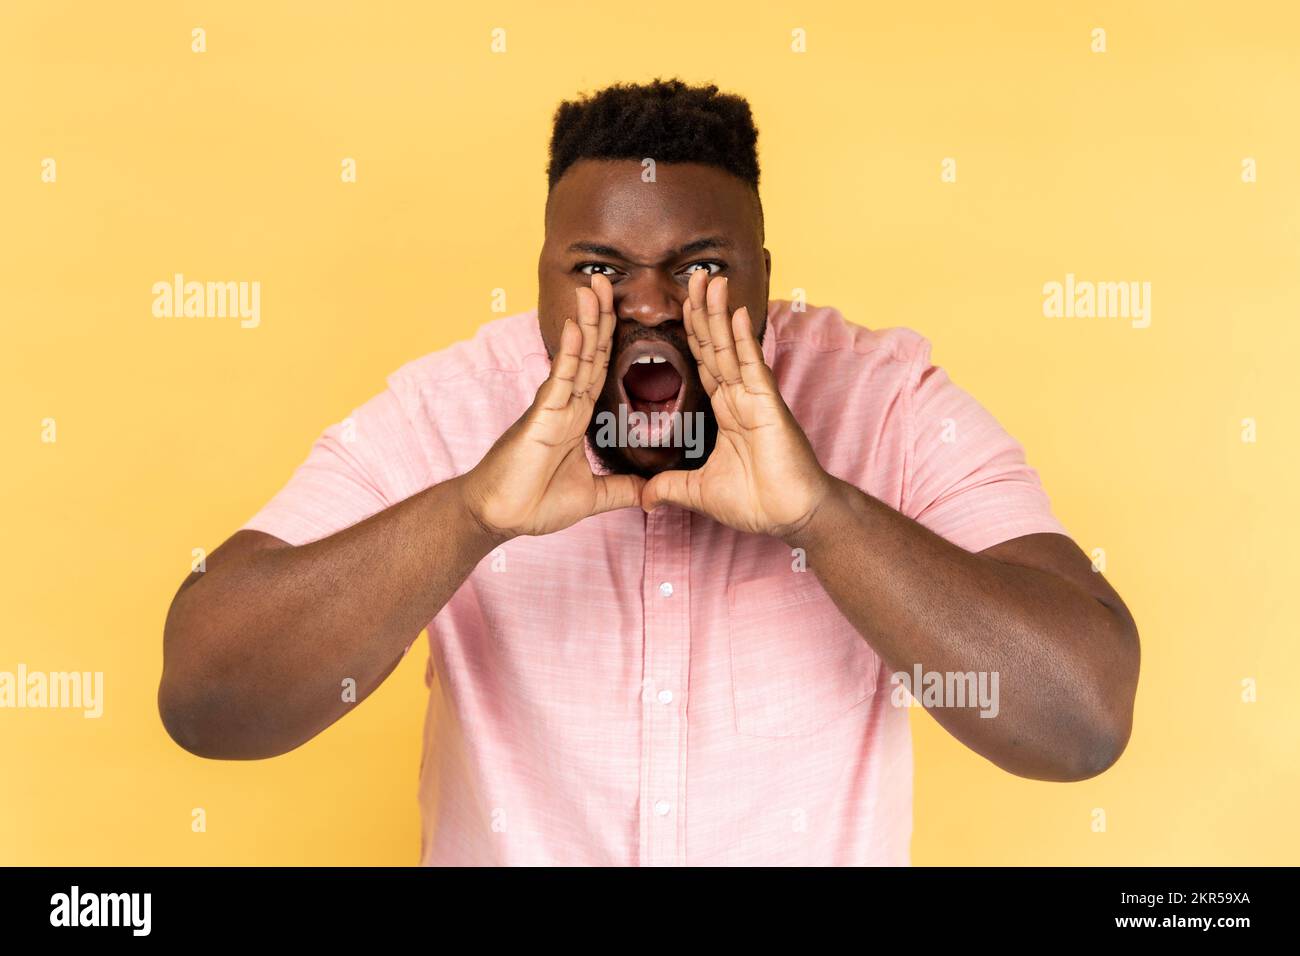 Portrait of angry aggressive man wearing pink shirt standing, holding arms near wide open mouth and screaming, trying to get attention. Indoor studio shot isolated on yellow background. Stock Photo